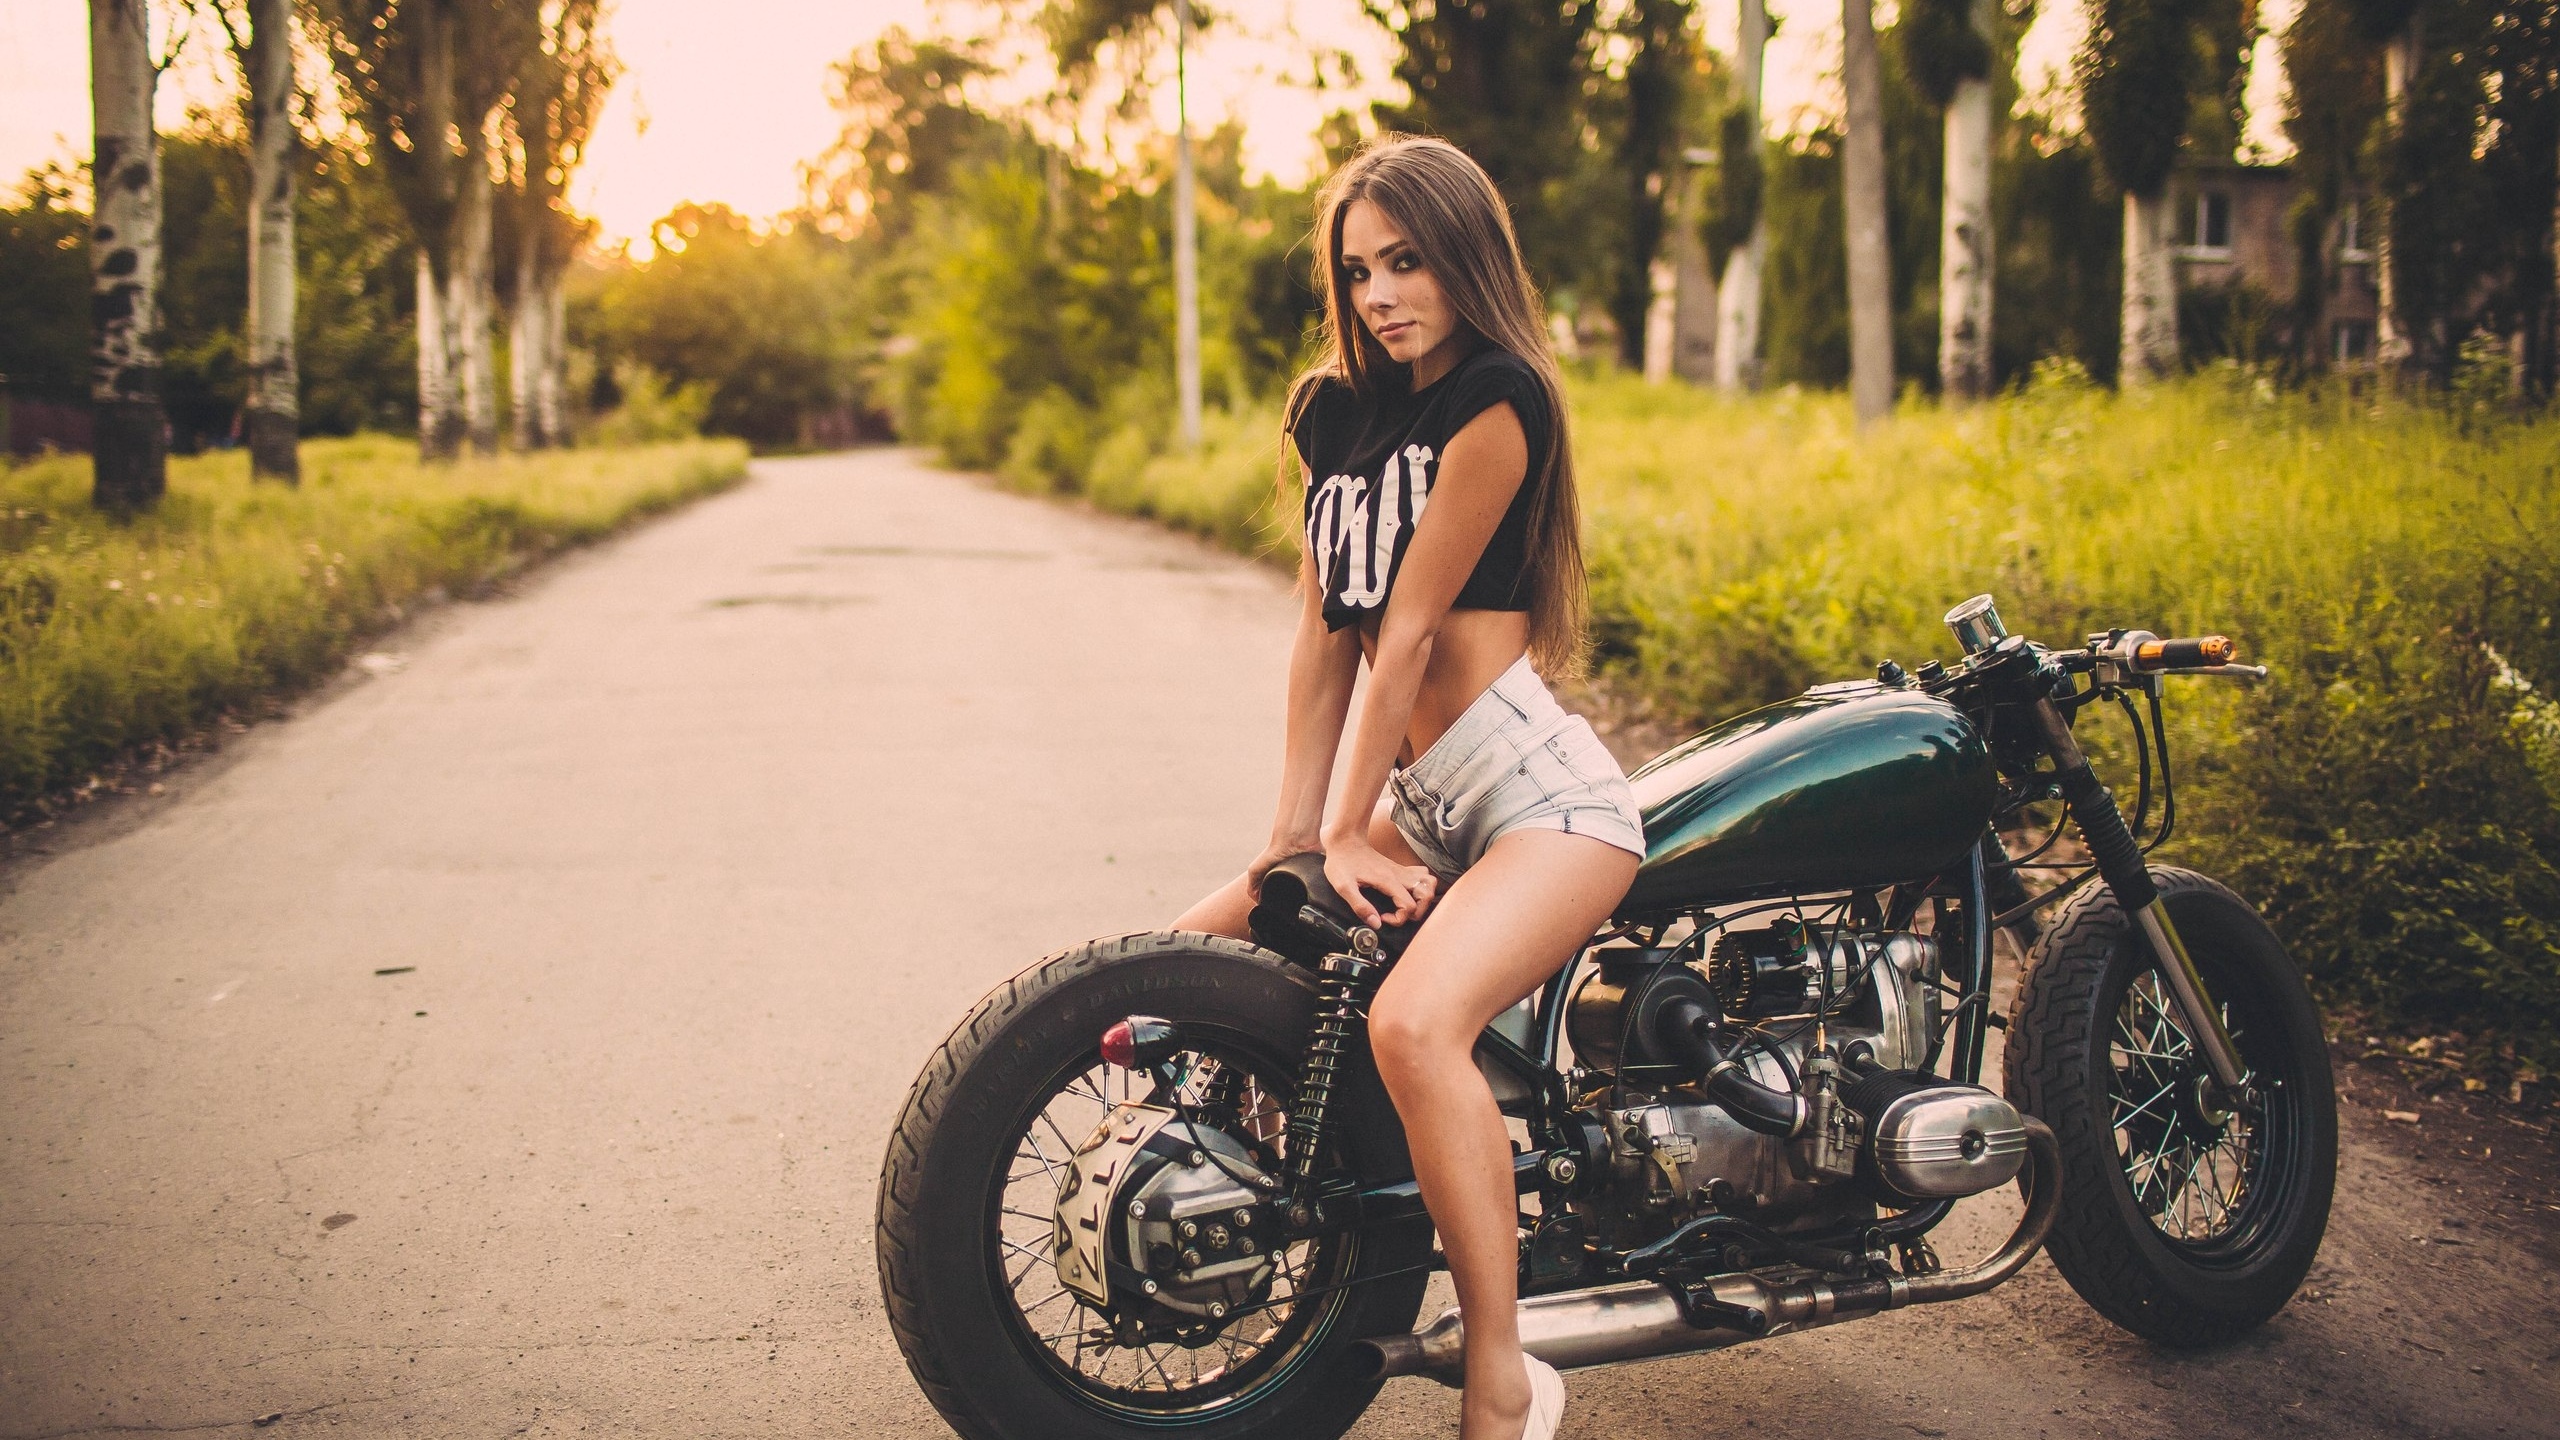 Motorcycle Model Women With Bikes Brunette Black Tops Women With Motorcycles 2560x1440